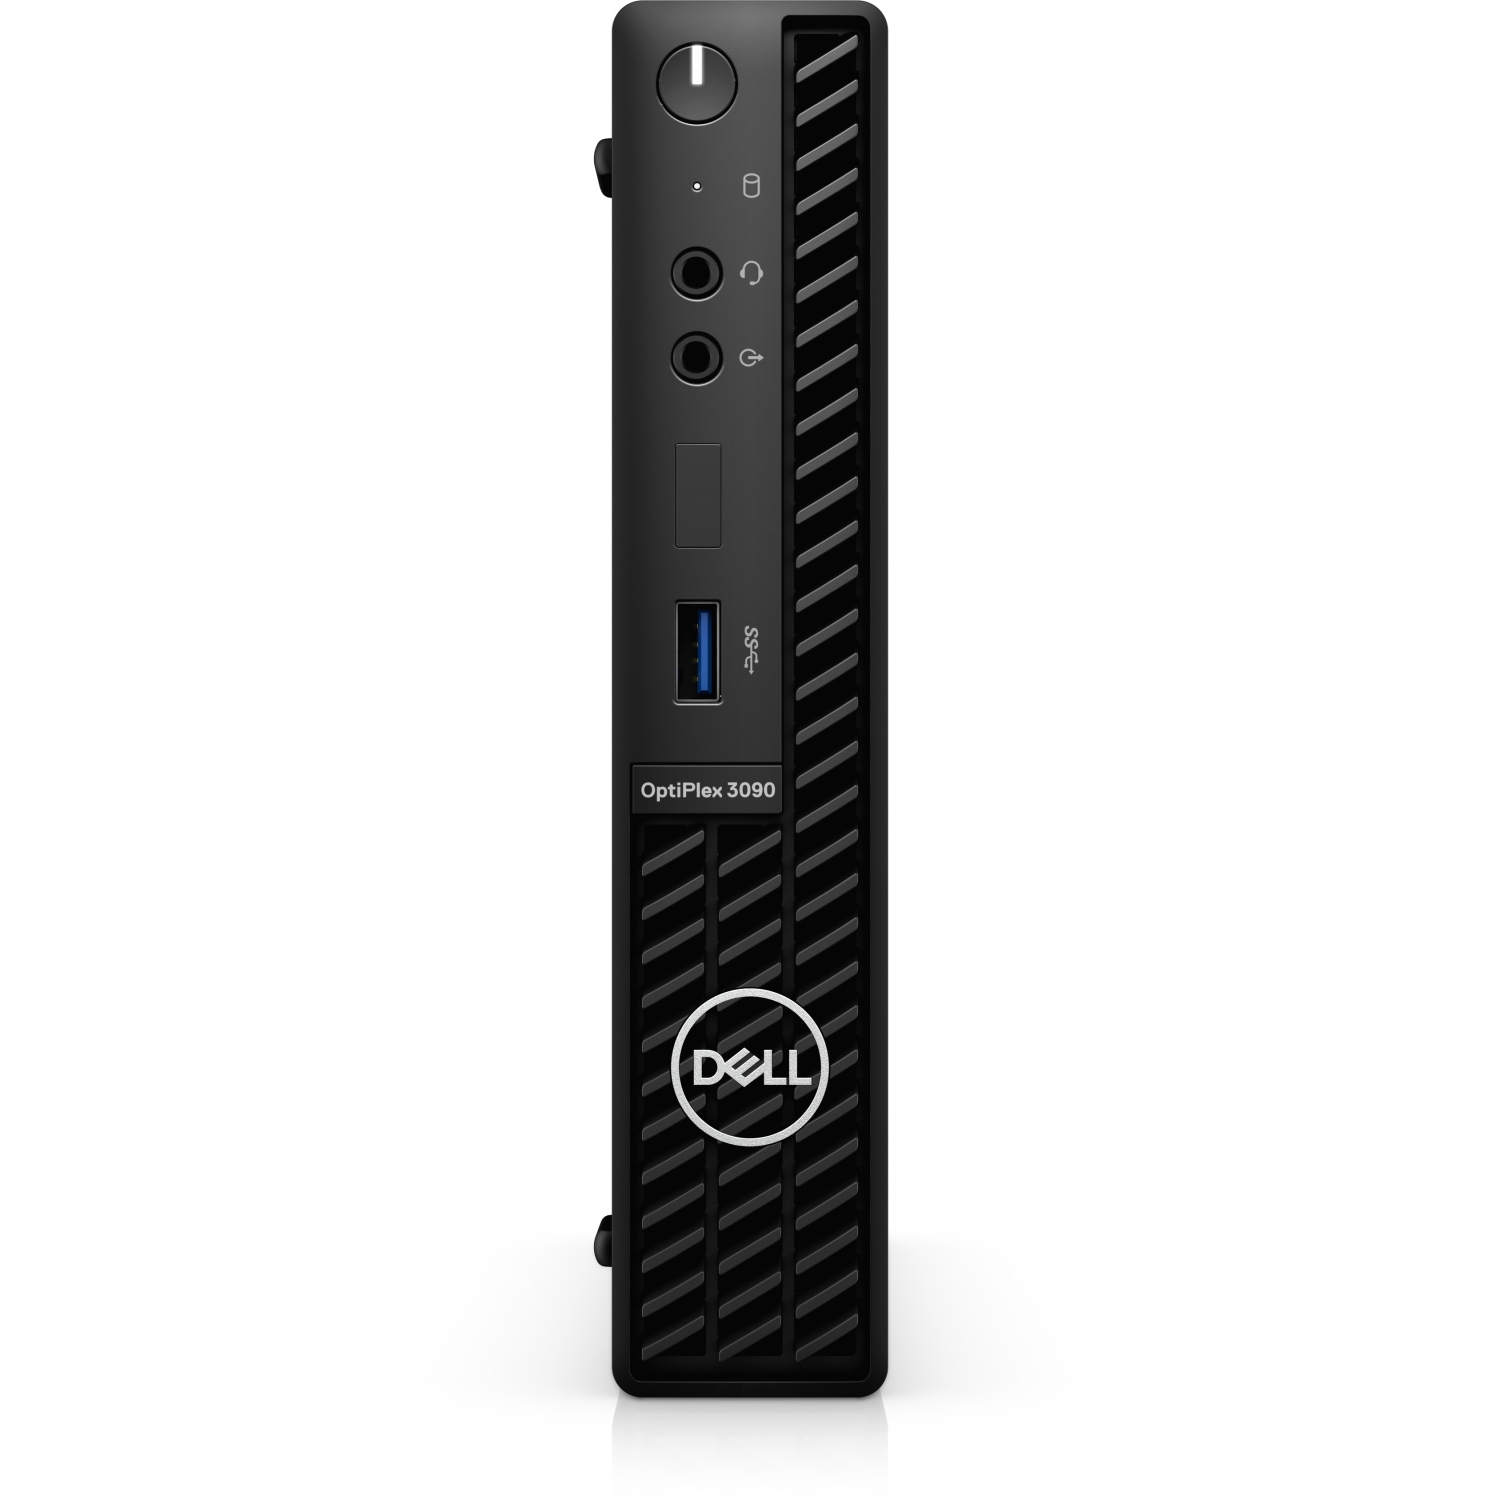 Refurbished (Excellent) - Dell Optiplex 3000 3090 Micro Tower Desktop (2021) | Core i7 - 256GB SSD - 8GB RAM | 8 Cores @ 4.5 GHz - 10th Gen CPU Certified Refurbished